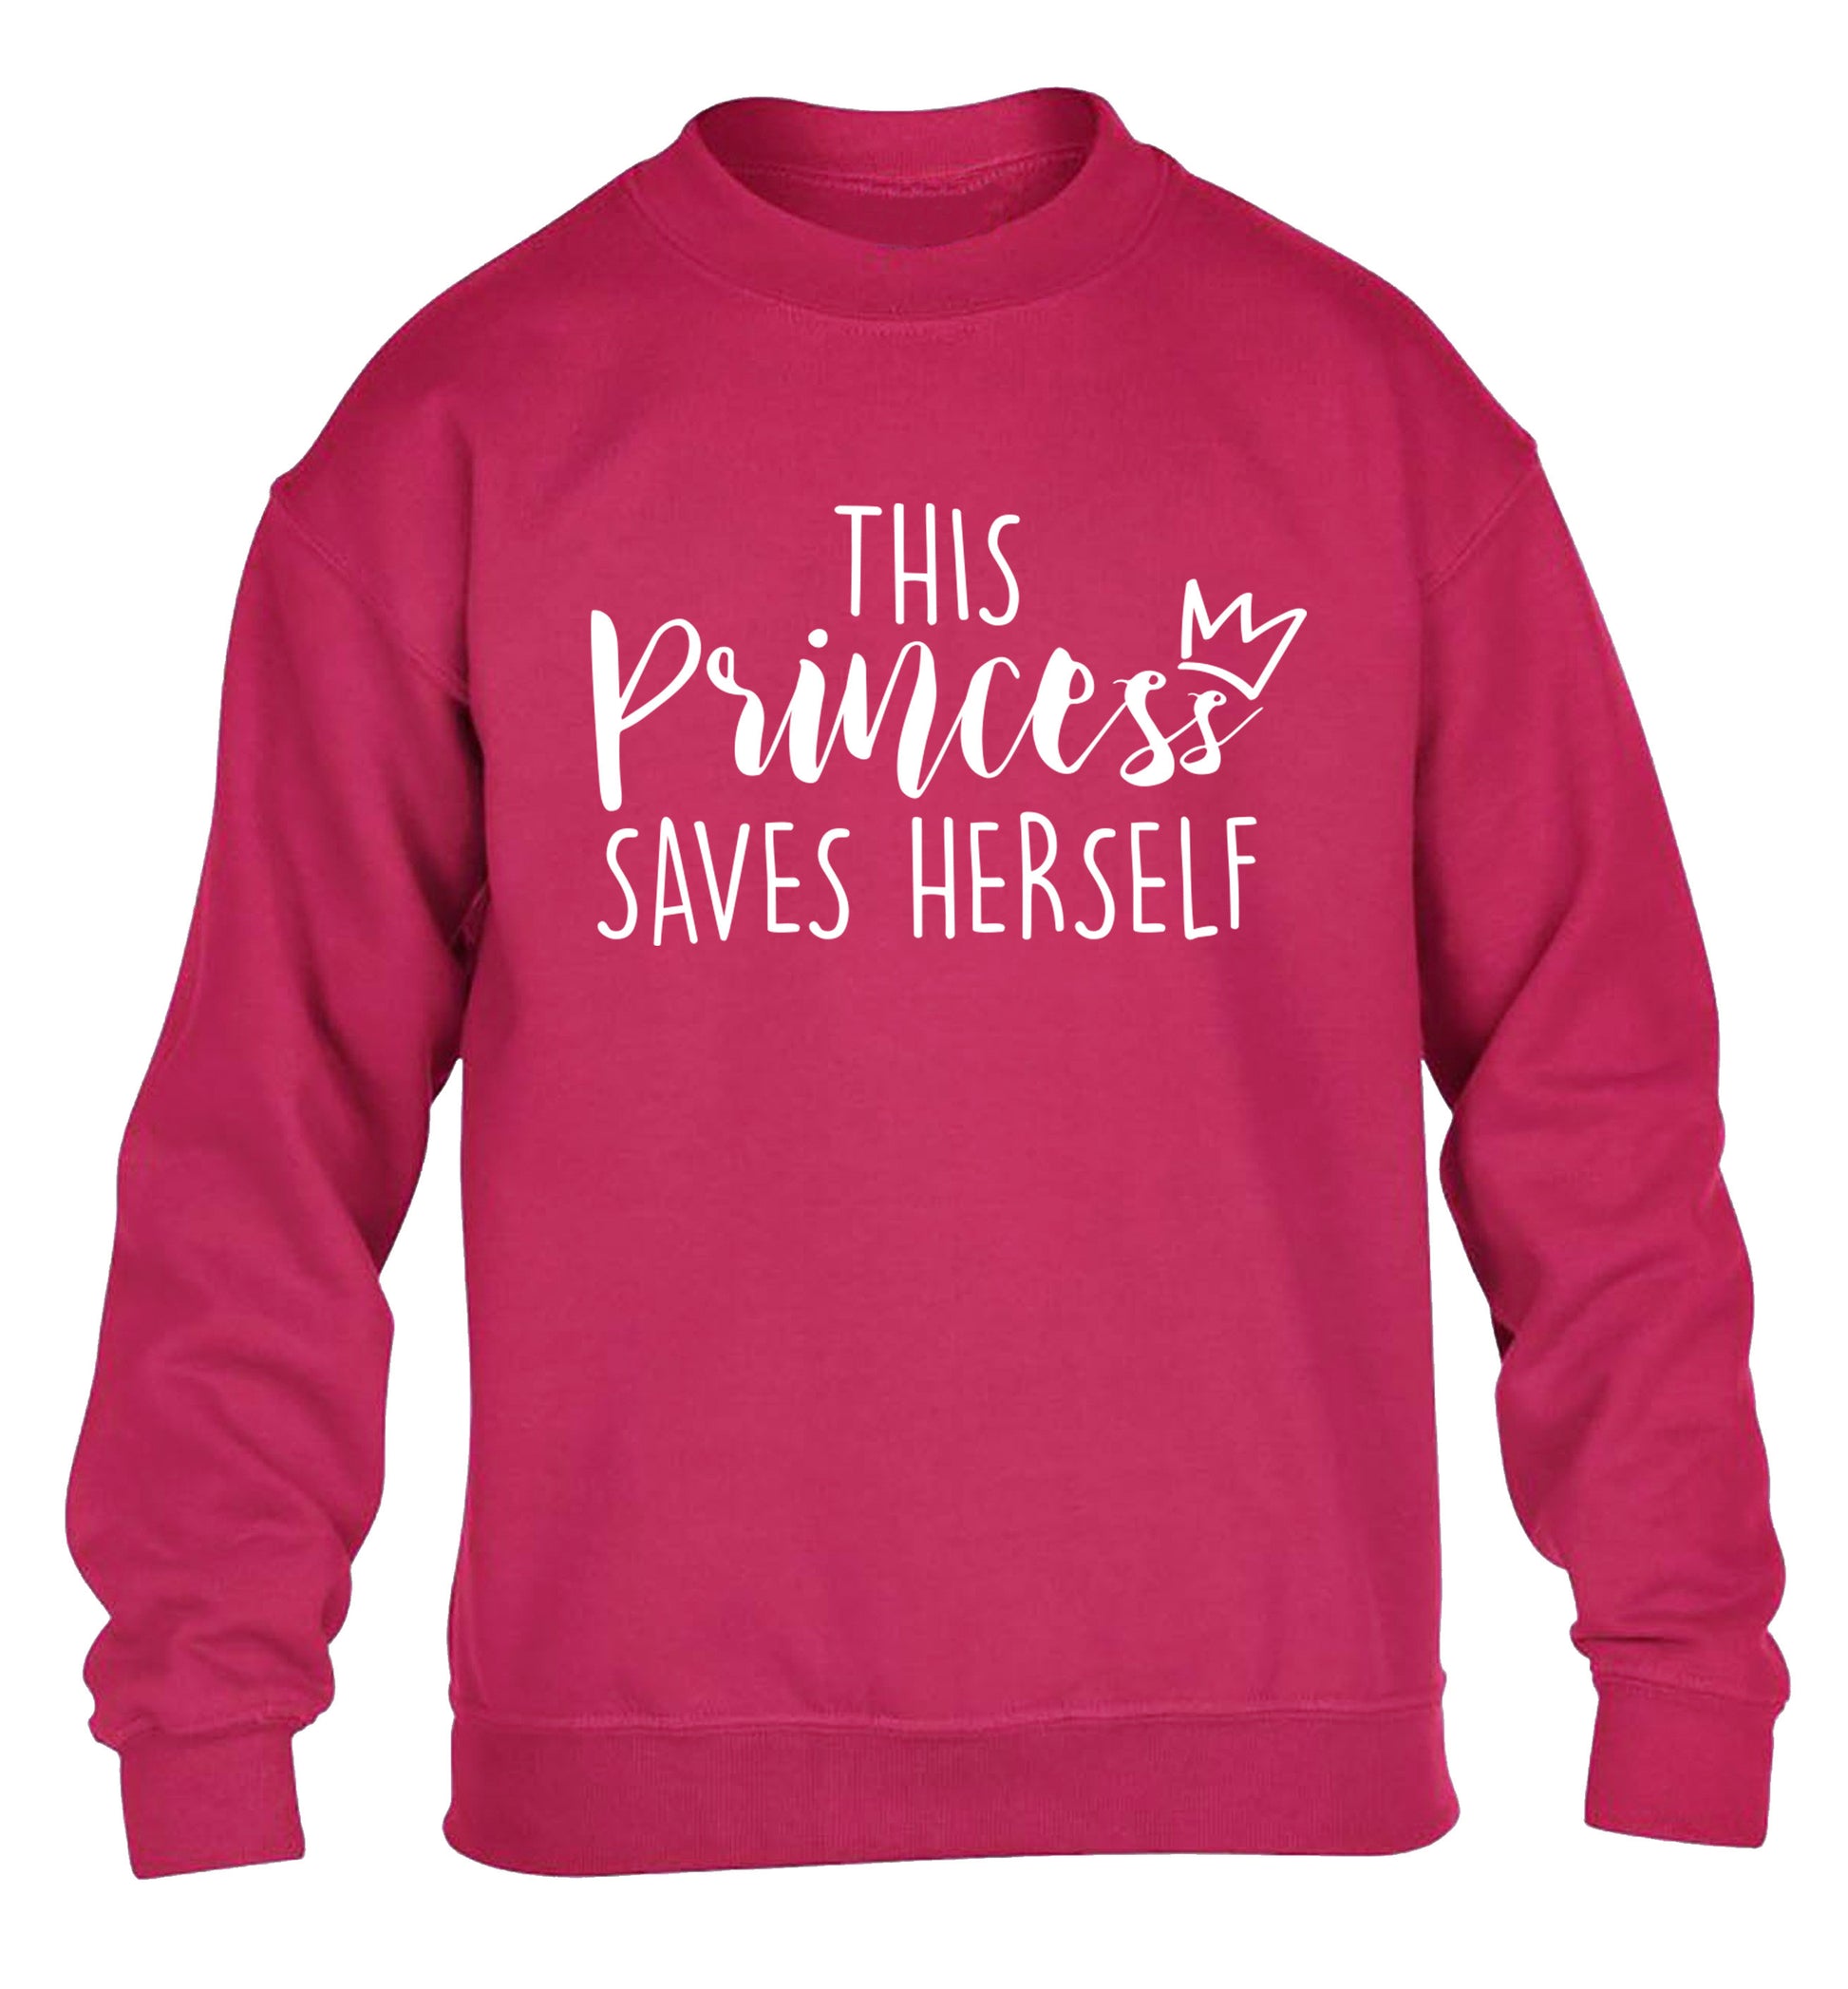 This princess saves herself children's pink sweater 12-14 Years